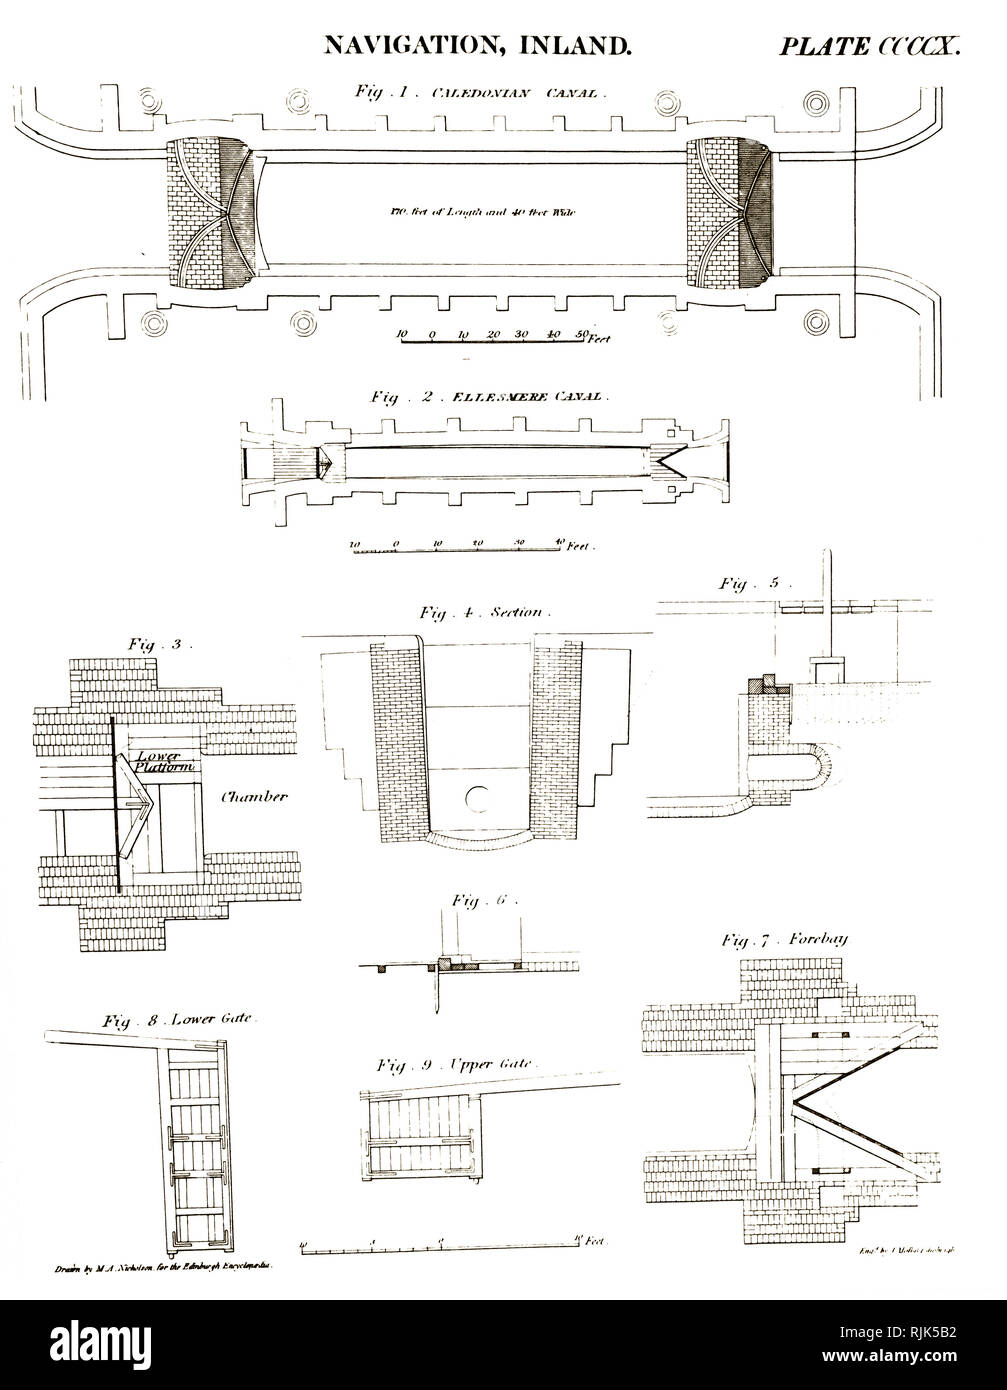 An engraving depicting the locks of the Caledonian and Ellesmere Canals. Fort Augustus Locks (top: Caledonian). Lock chambers and gates (Figs 3-9: Ellesmere). Dated 19th century Stock Photo